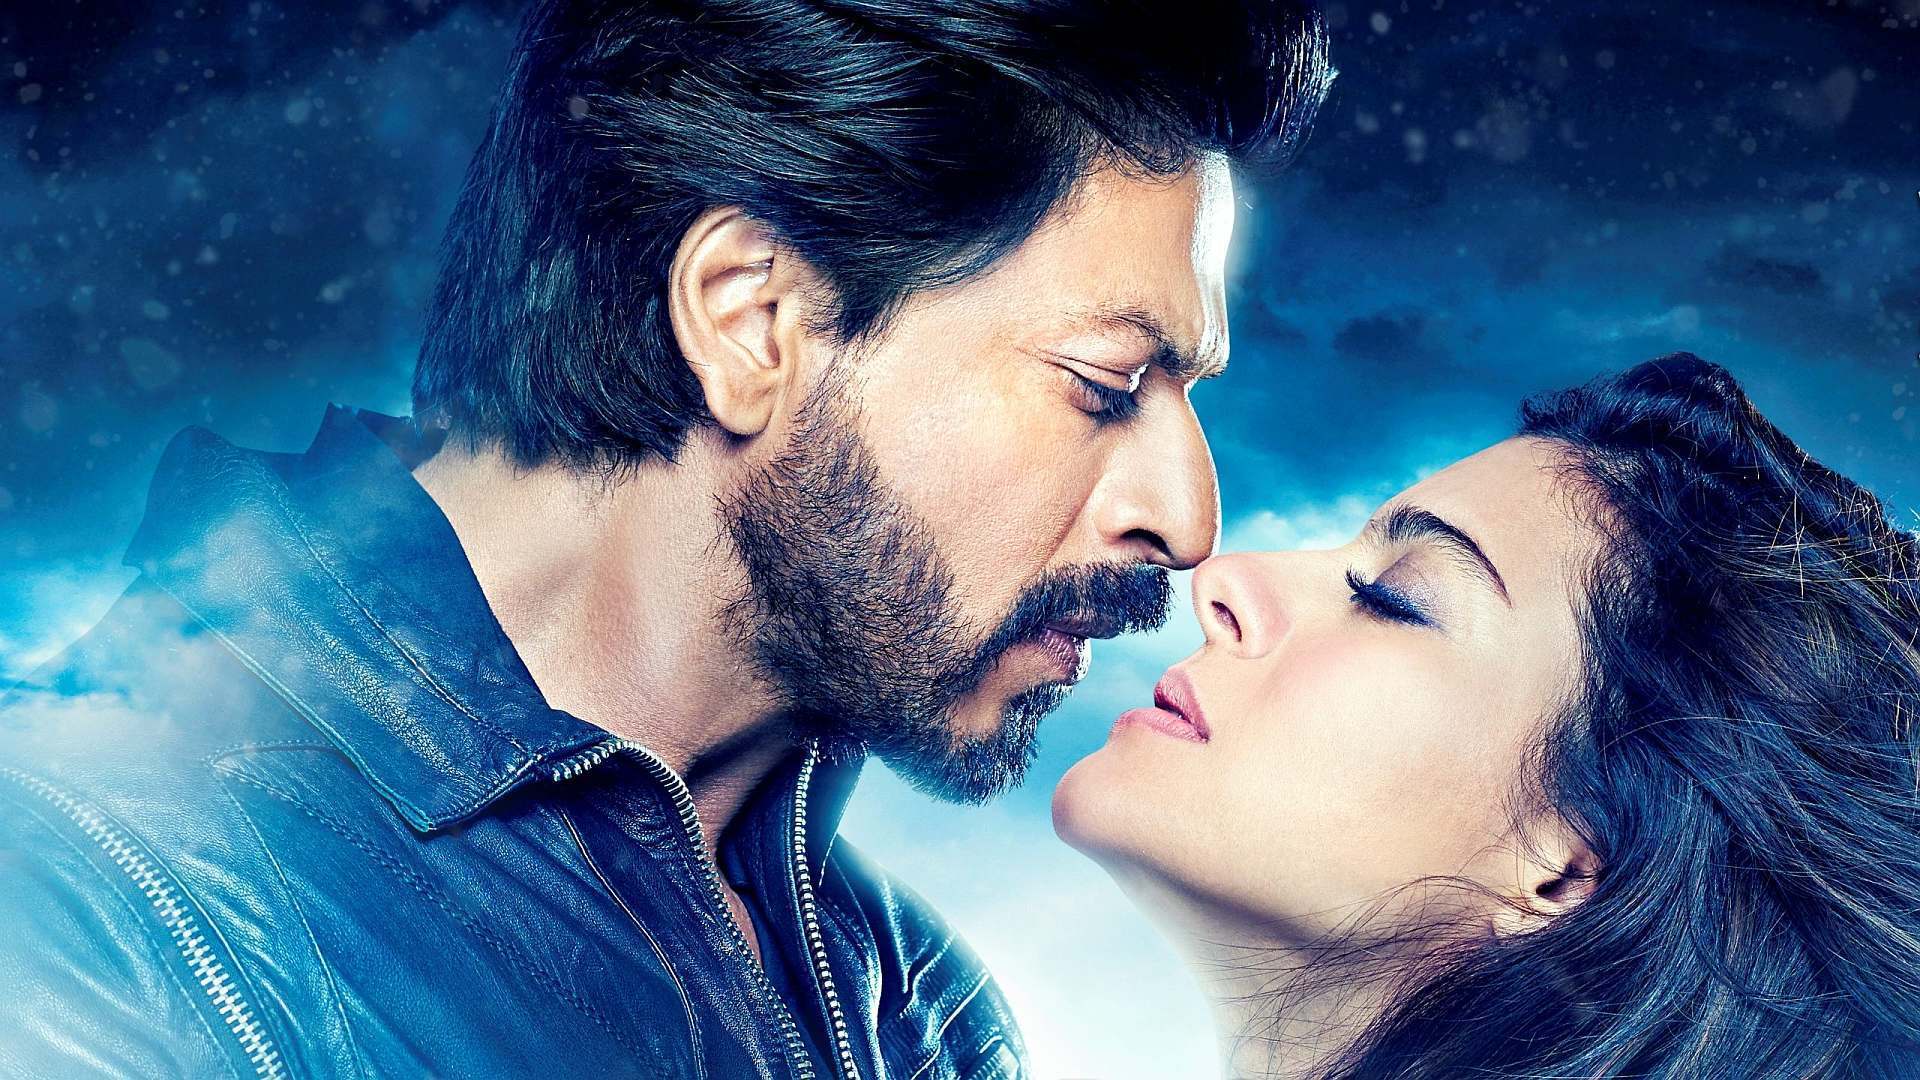 dilwale subtitle download